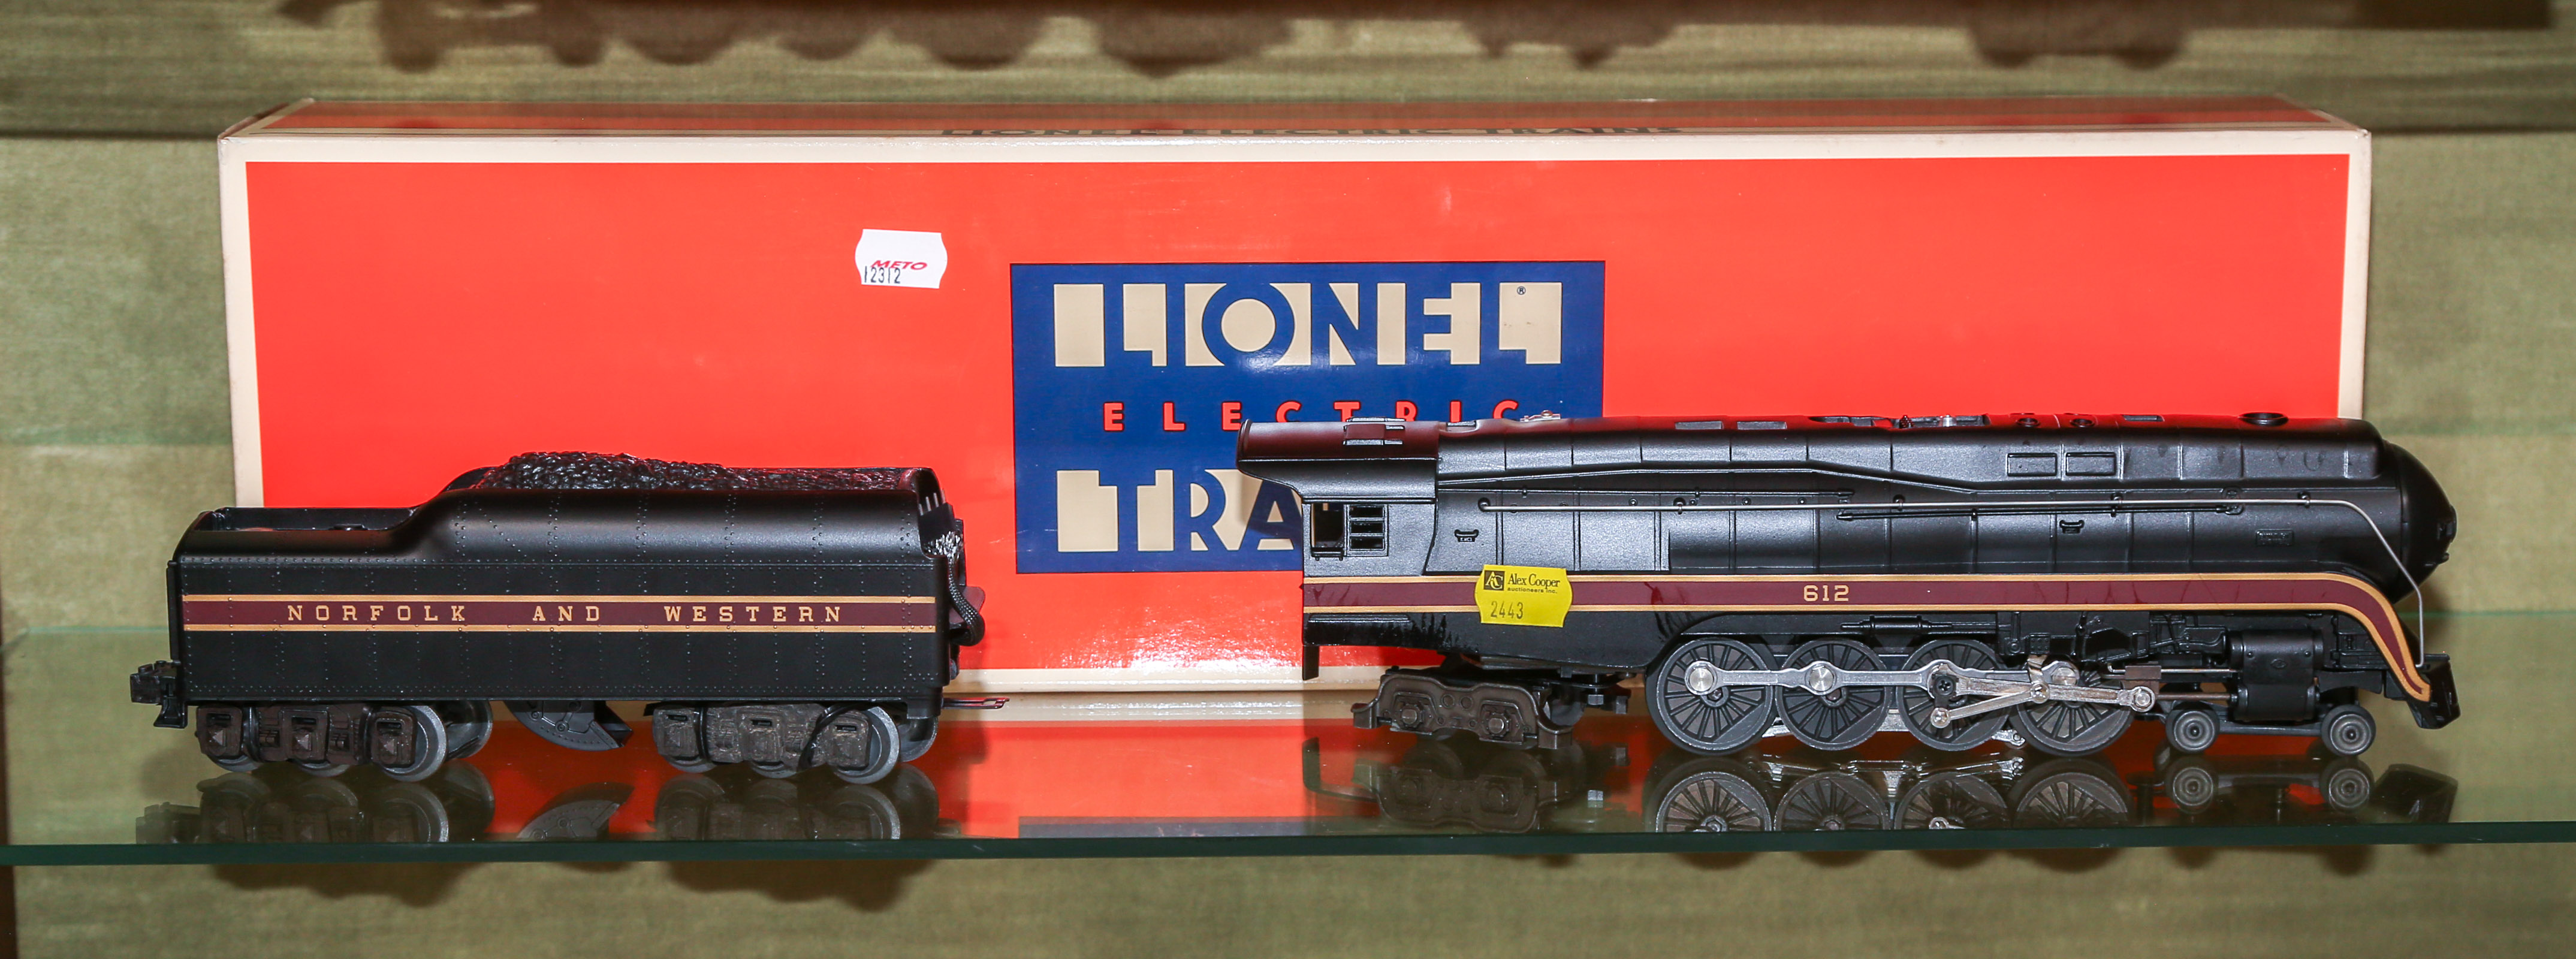 LIONEL 4 8 4 ENGINE TENDER All 2eaaa2